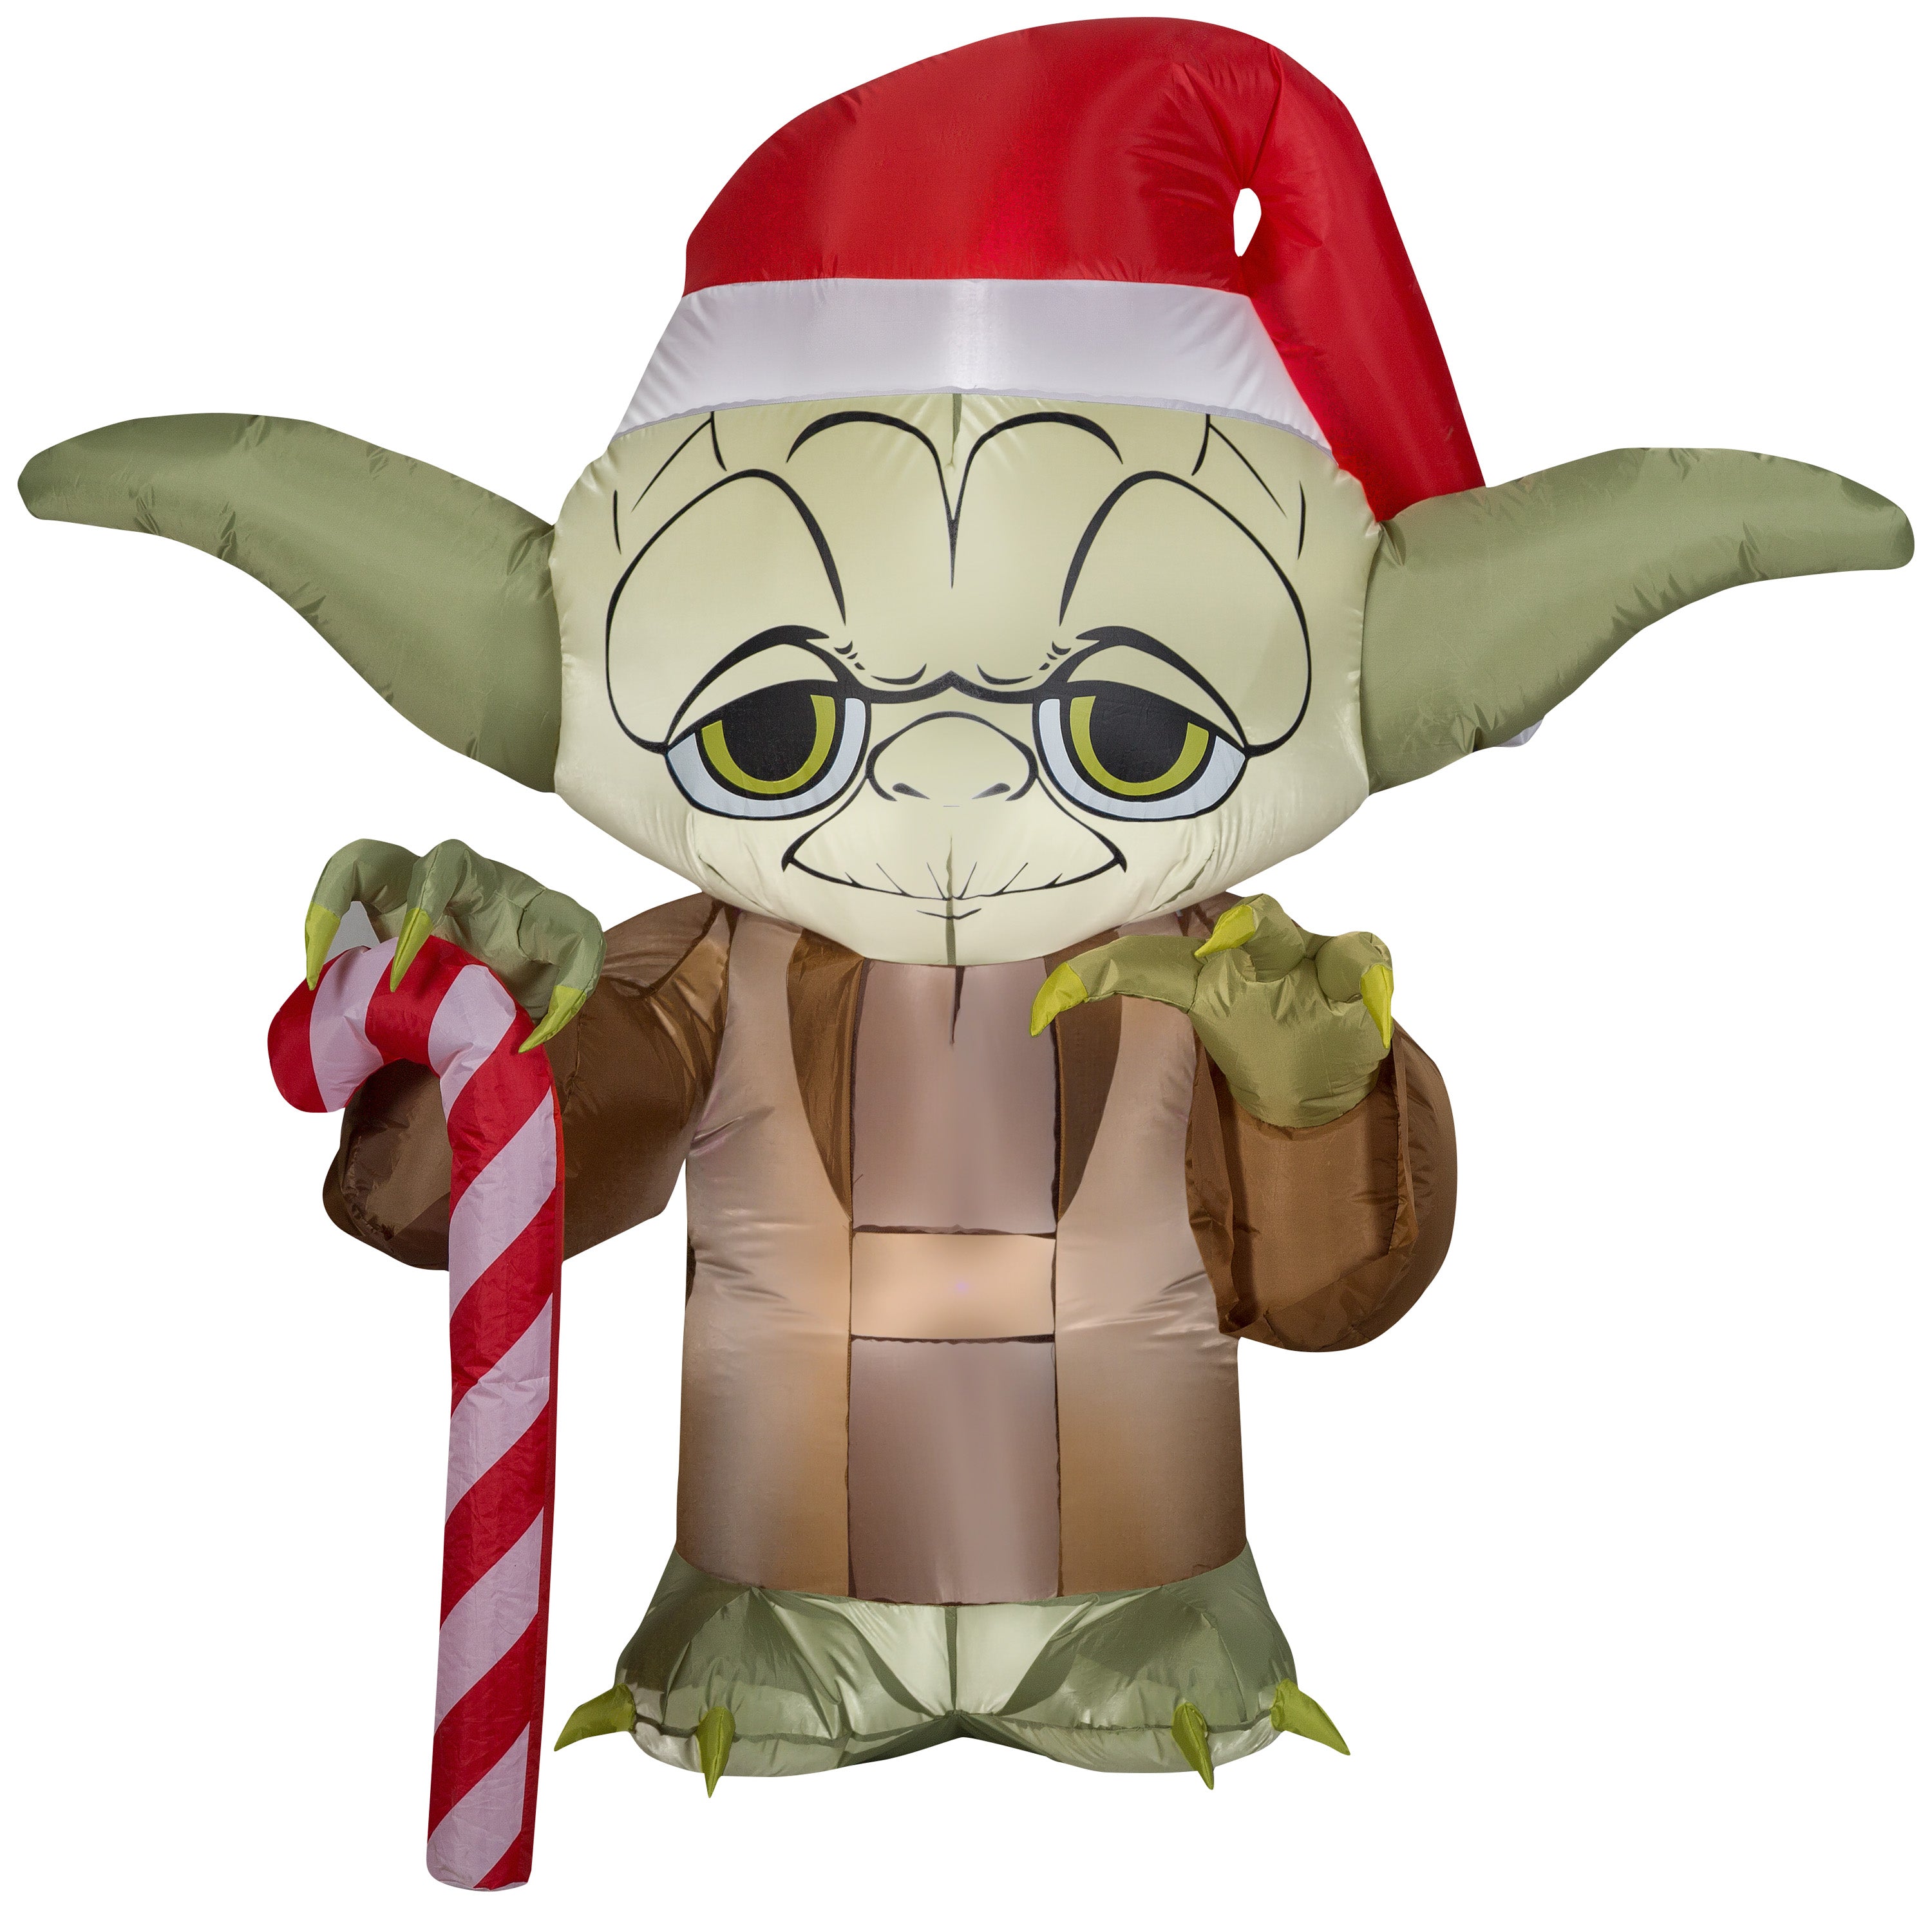 Gemmy Christmas Airblown Inflatable Inflatable Yoda with Candy Cane, 4.5 ft Tall, brown